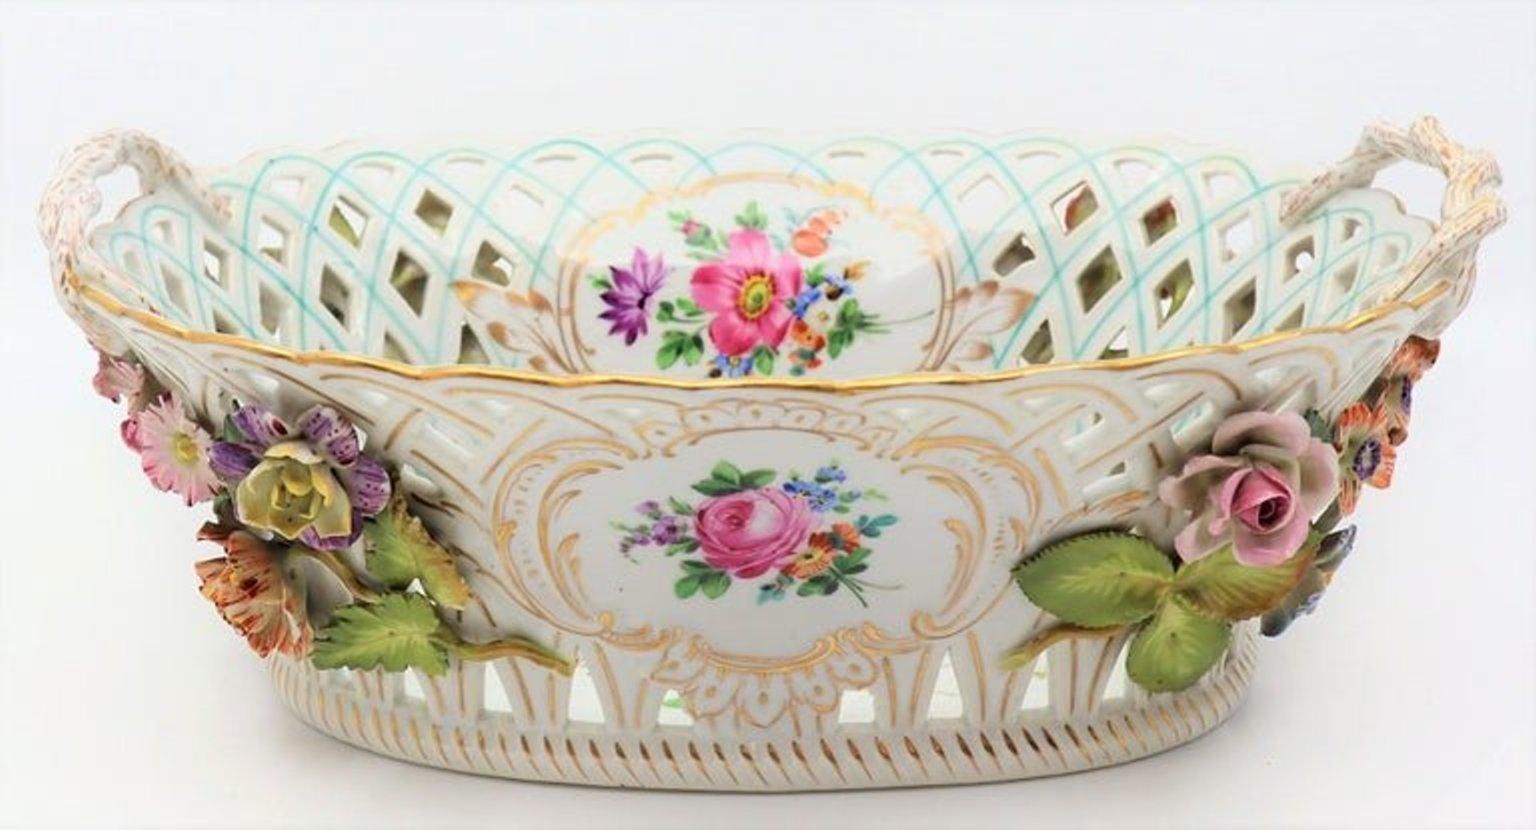 Basket with hand painted colorful flower motifs on cartouche and in relief

Shipping included
Original art work from Europe.
 